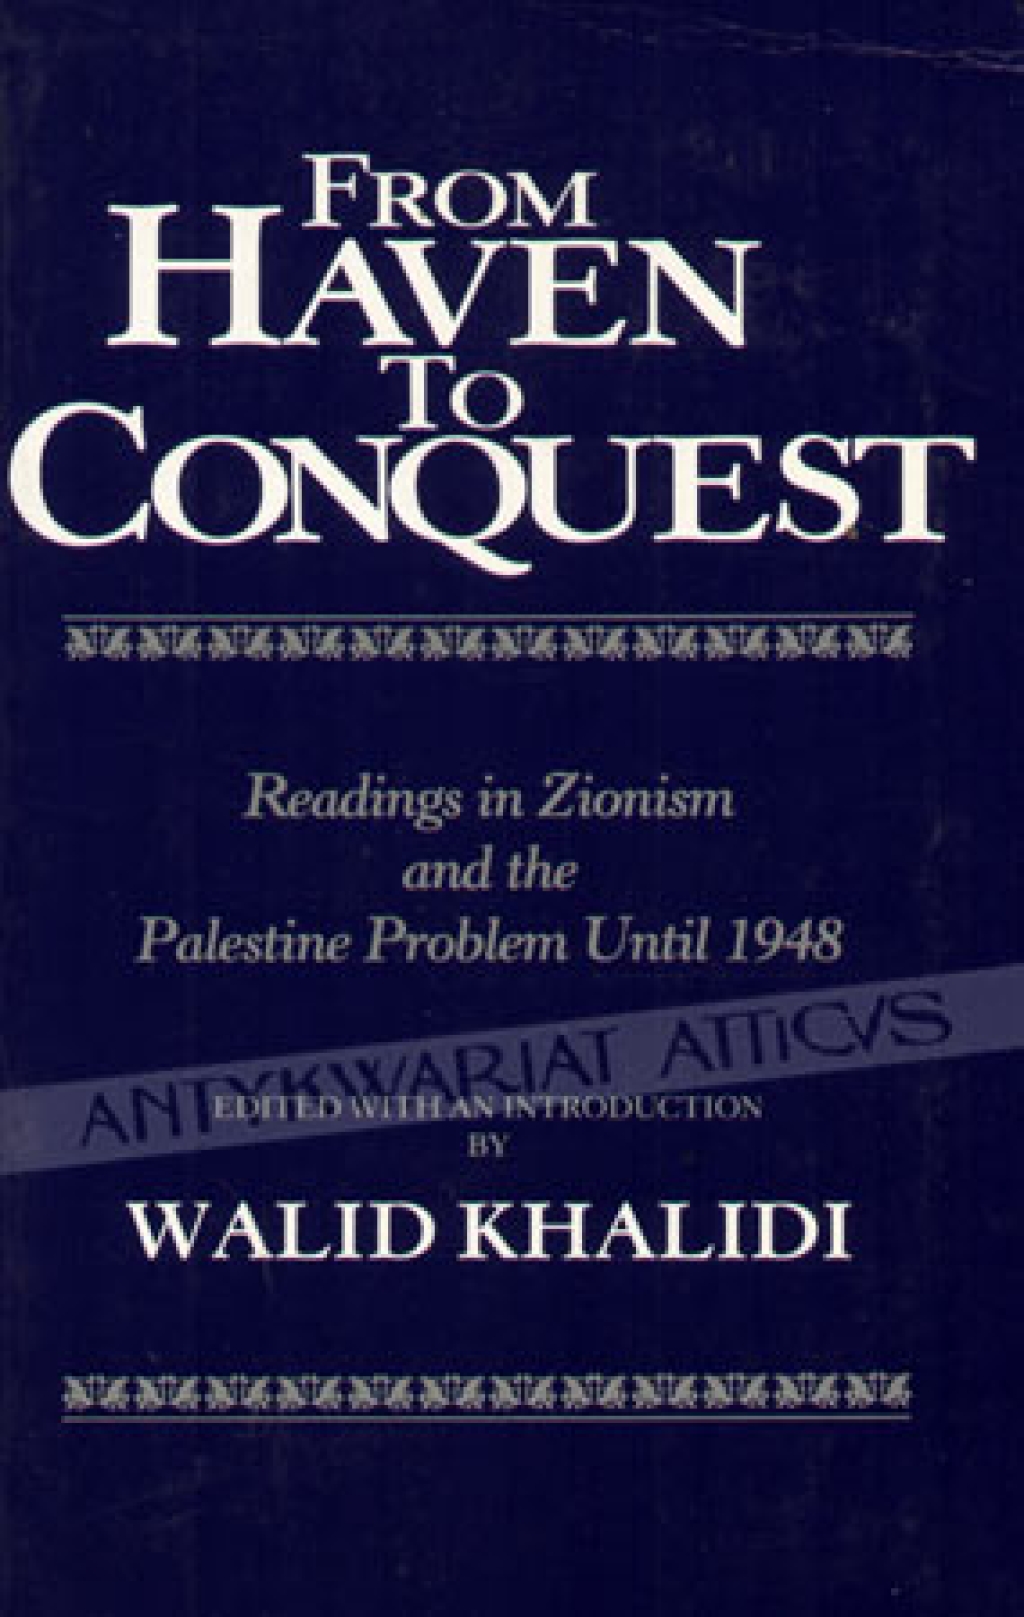 From Haven to Conquest. Readings in Zionism and the Palestine Problem Until 1948